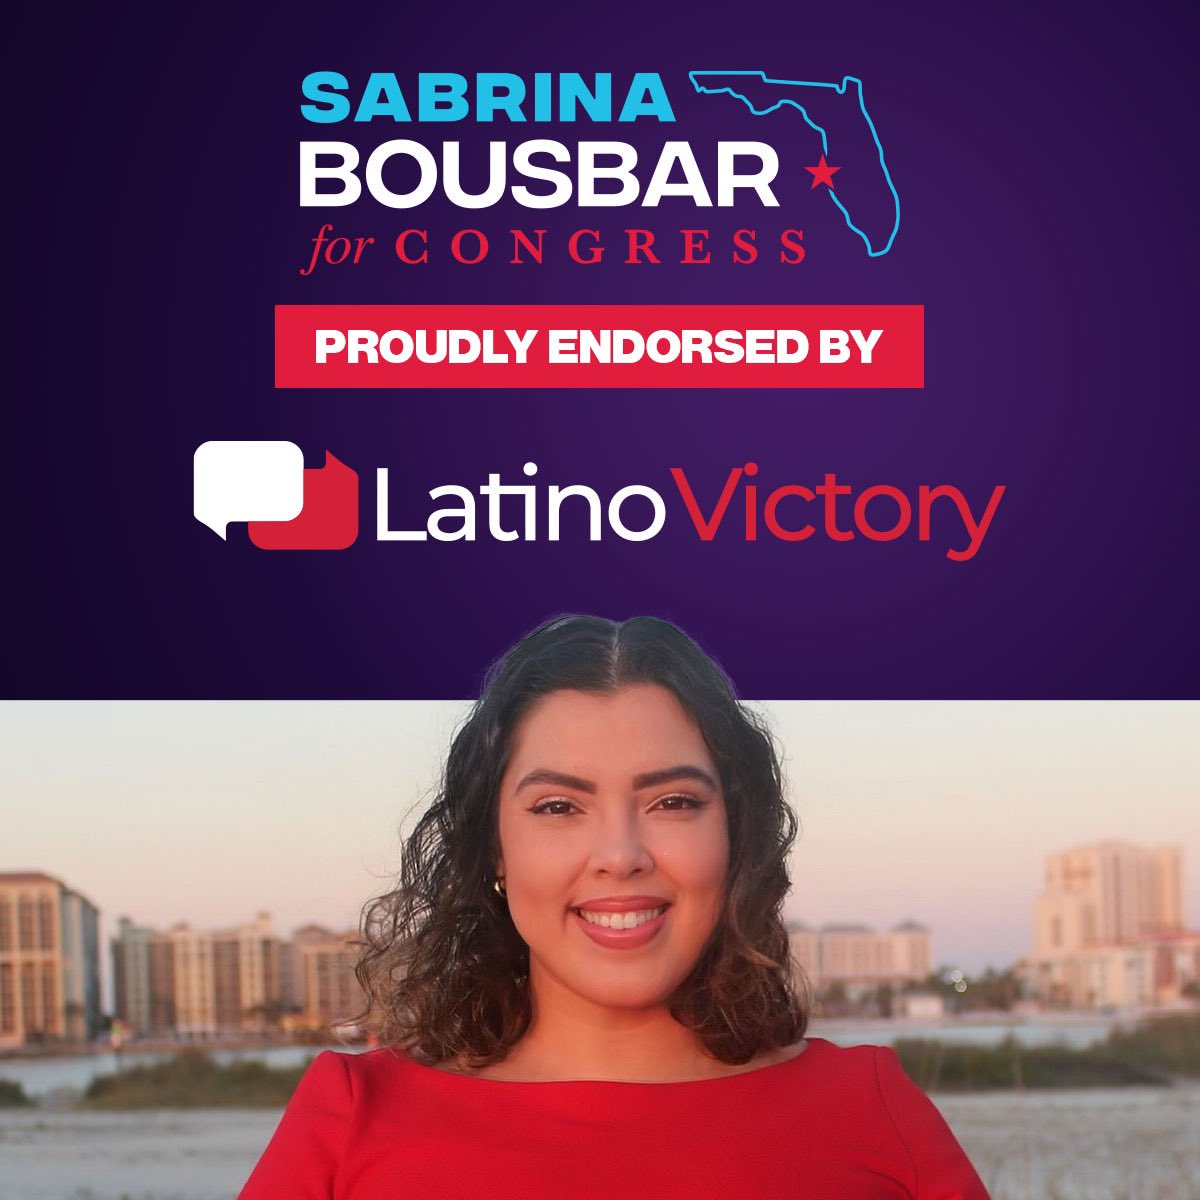 “Sabrina has the grit and passion for serving others that we need in Congress during these challenging times. Her experience in preparedness and recovery has been invaluable to our country and she will continue to serve her community by advocating for abortion rights, and…